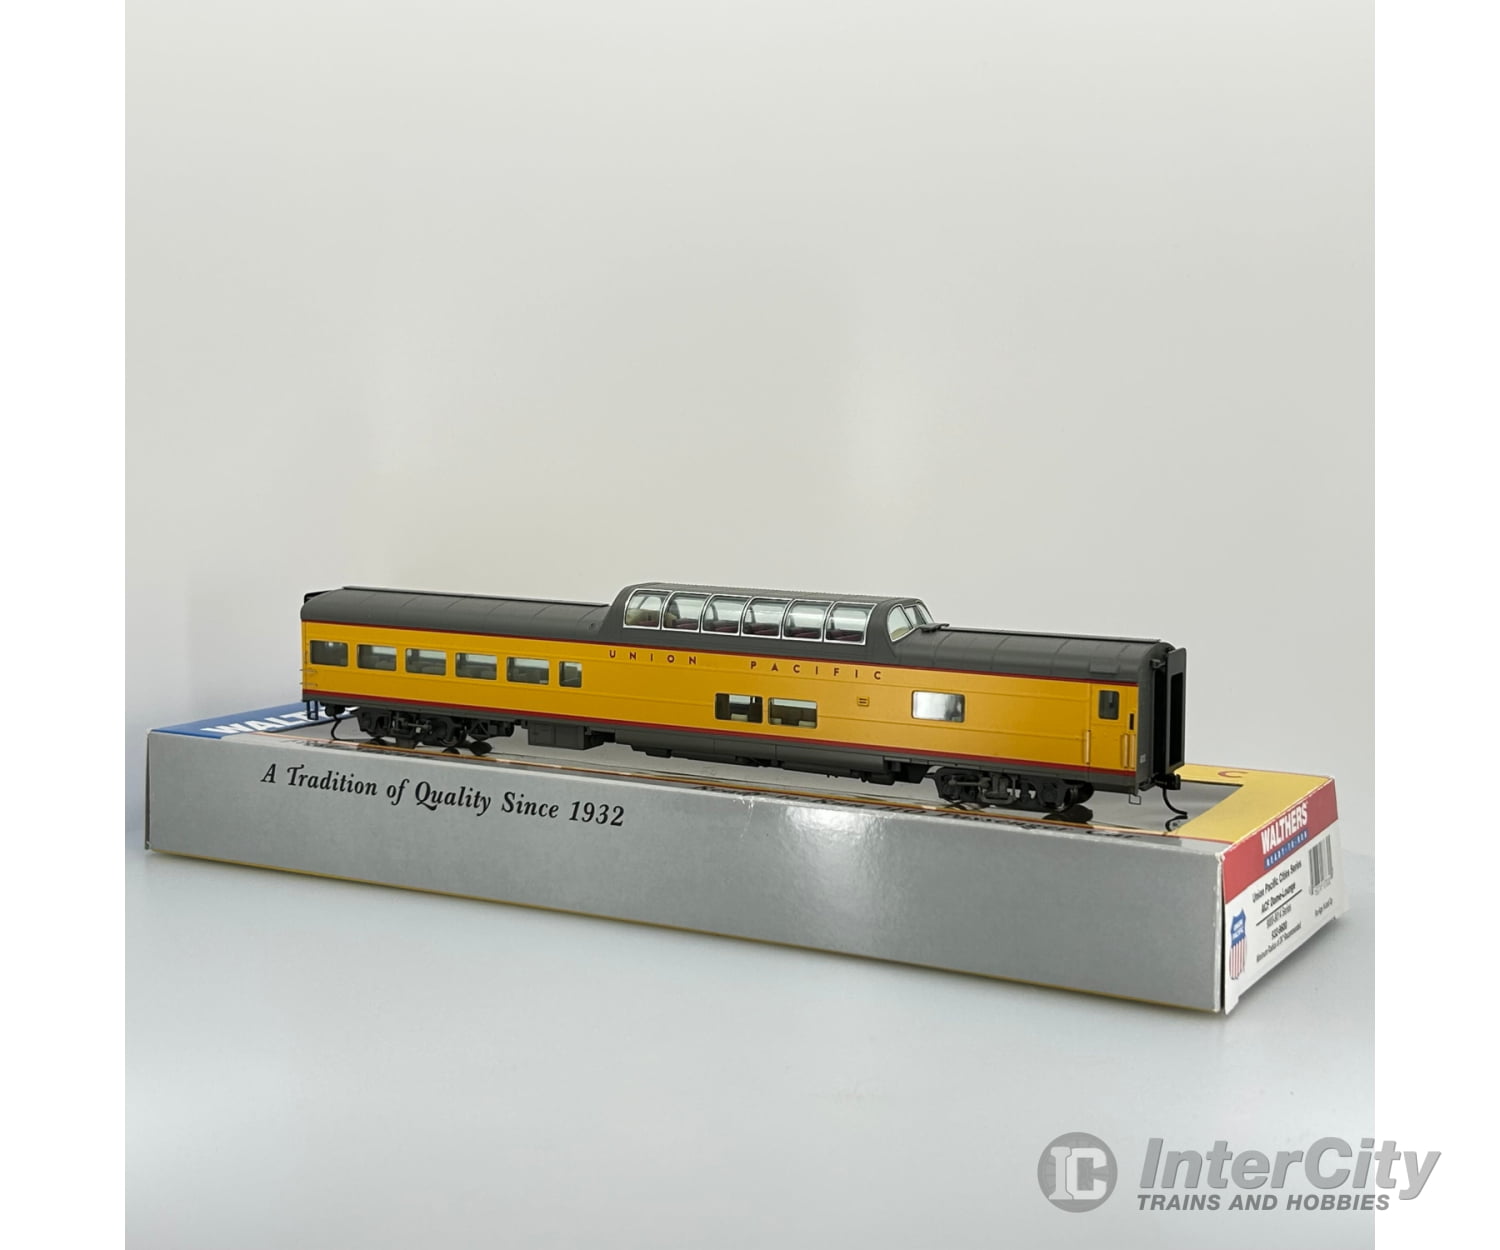 Walthers 932-9600 Ho Acf Dome-Lounge Cities Series 9000-9014 Union Pacific Passenger Cars